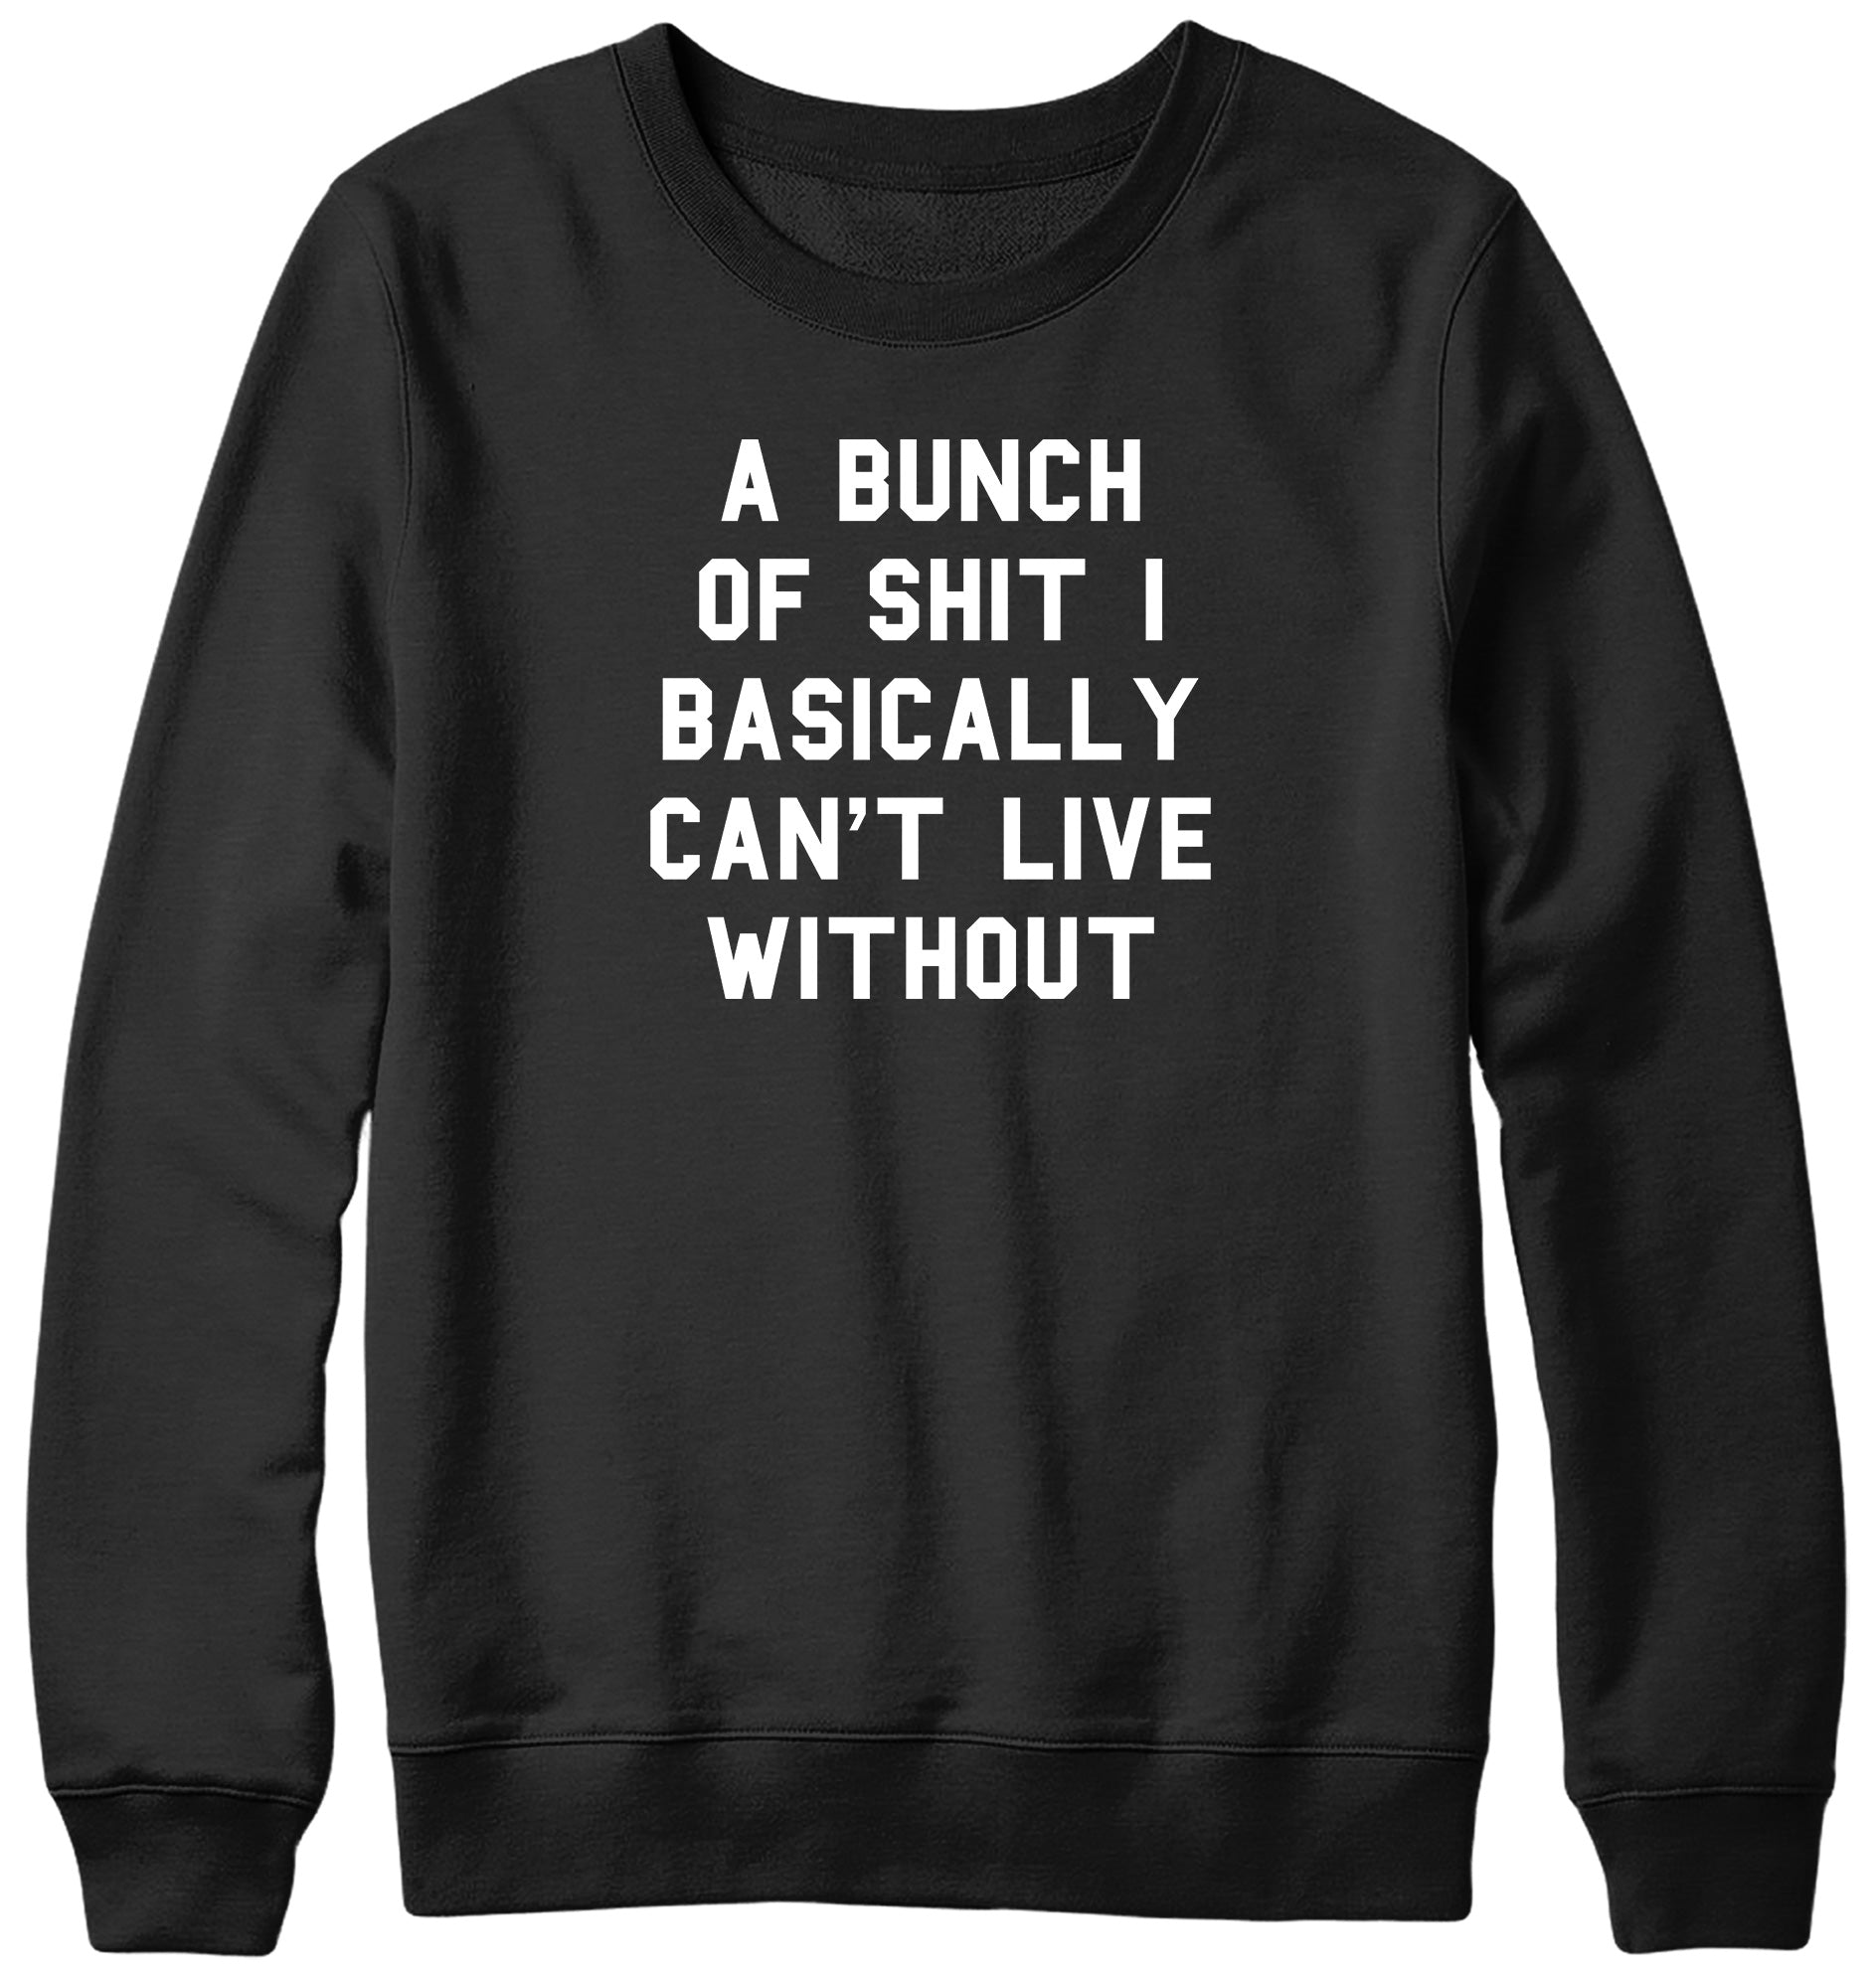 A BUNCH OF SHIT I BASICALLY CAN'T LIVE WITHOUT MENS LADIES WOMENS UNISEX SWEATSHIRT SWEATER